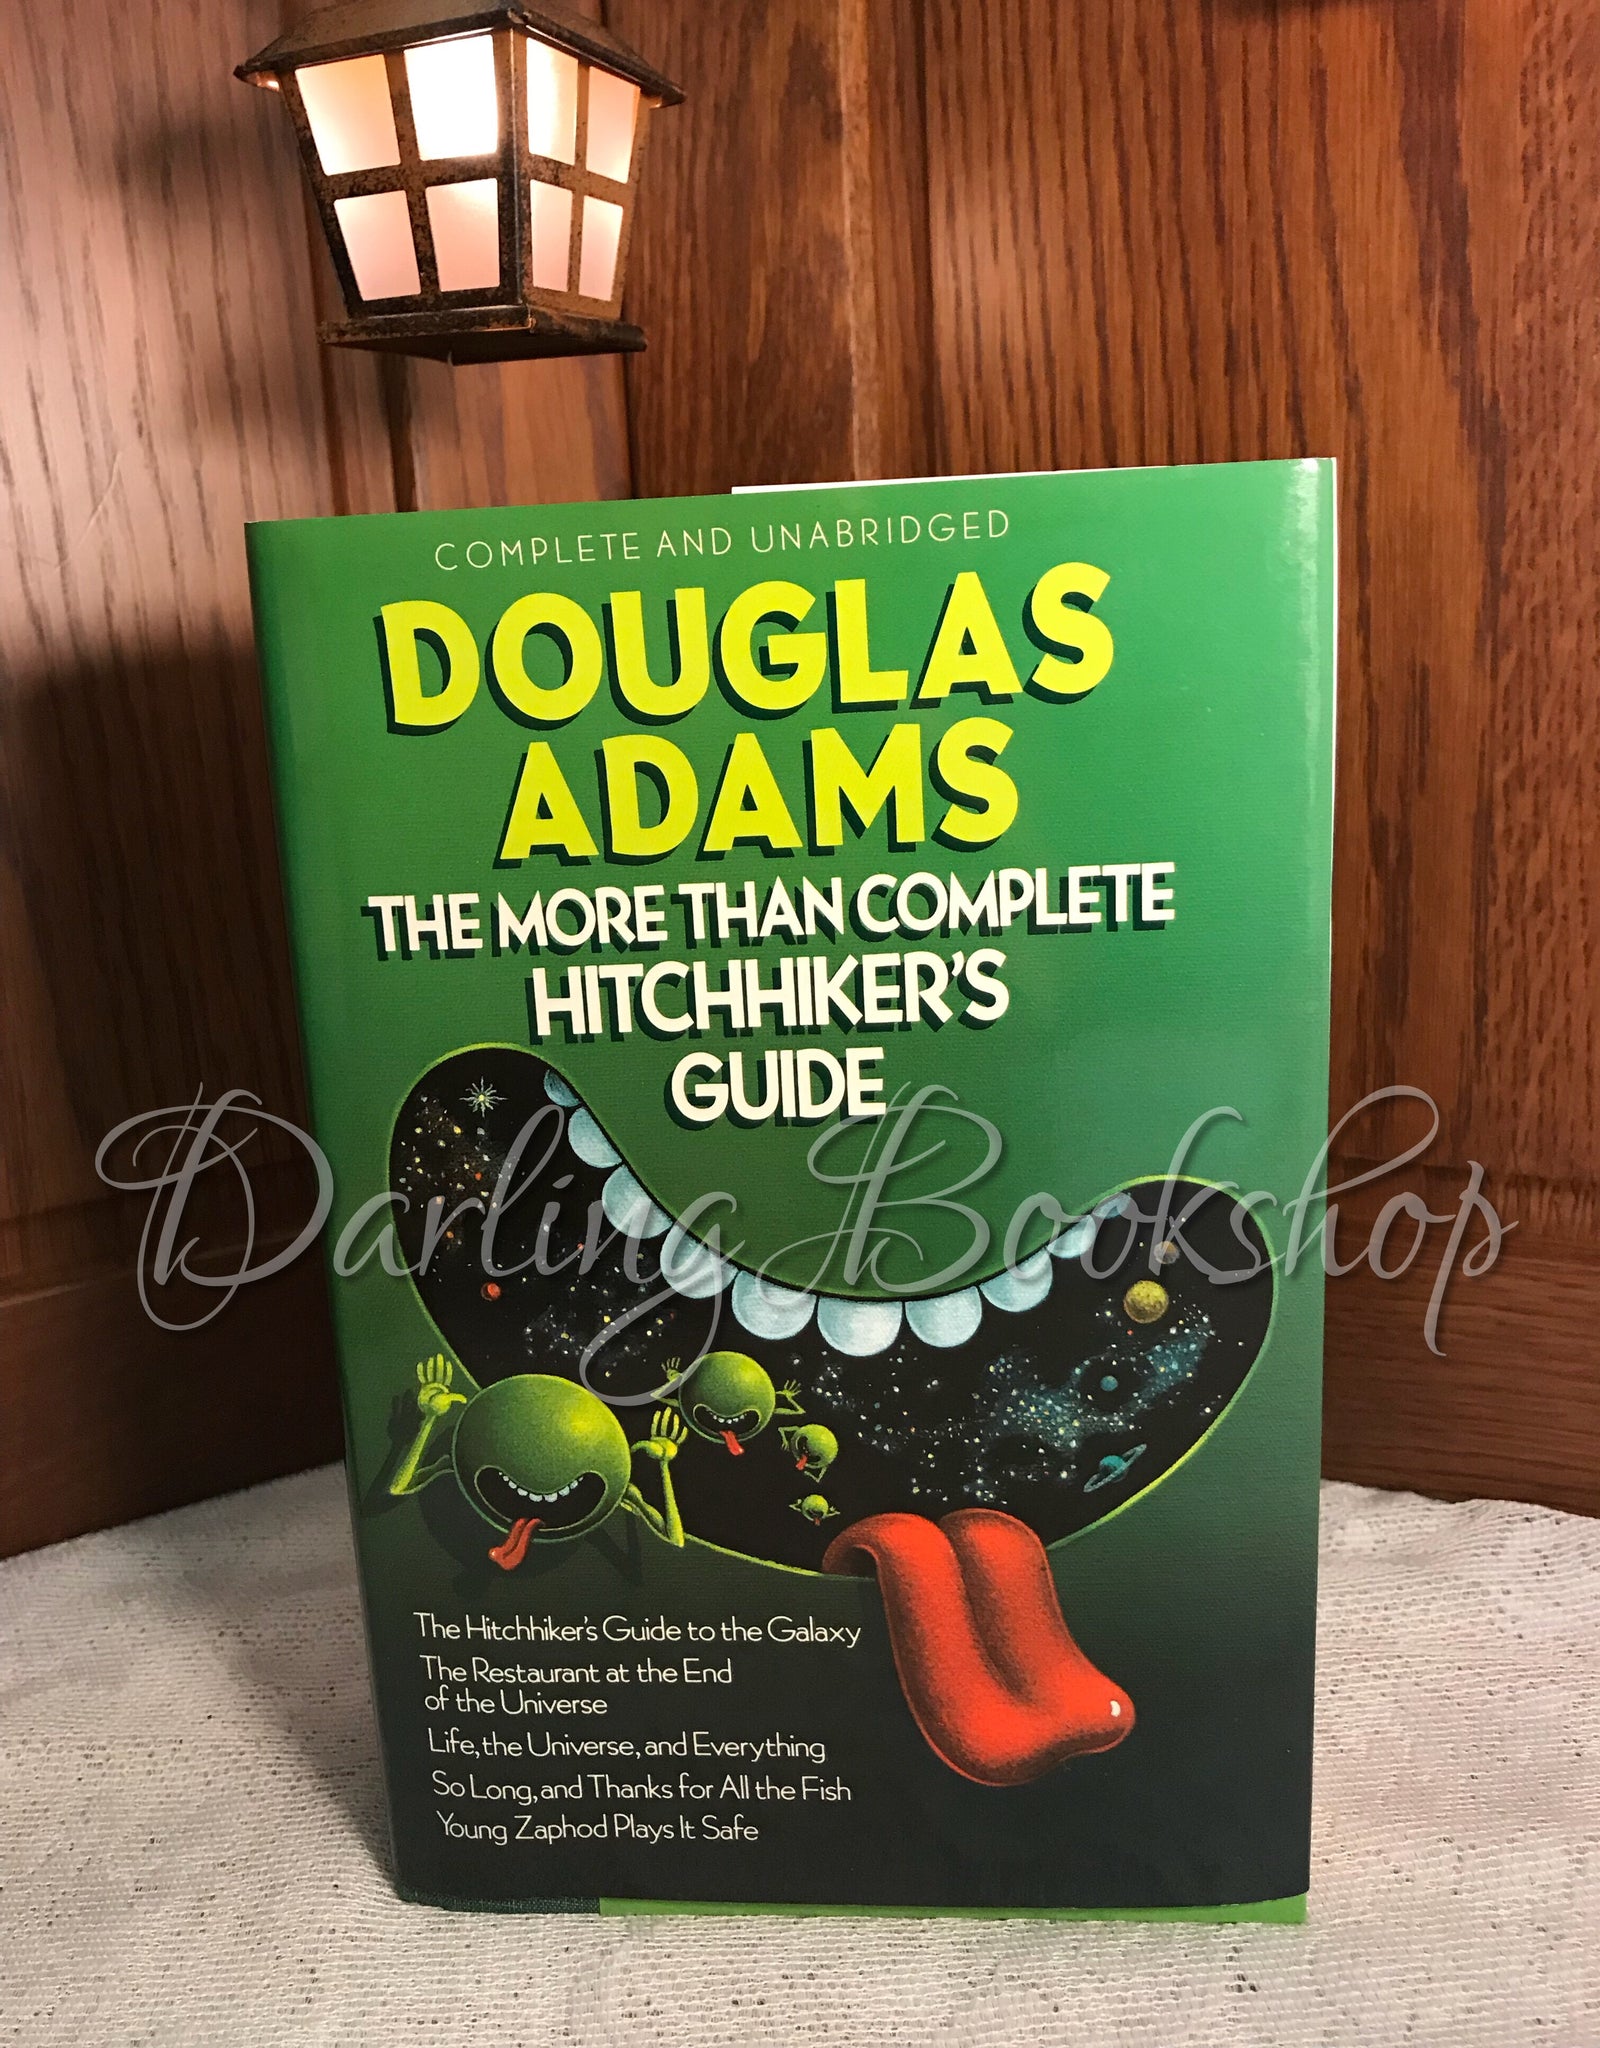 The Hitchhikers Guide To The Galaxy Omnibus : Douglas Adams : Free  Download, Borrow, and Streaming : Internet Archive